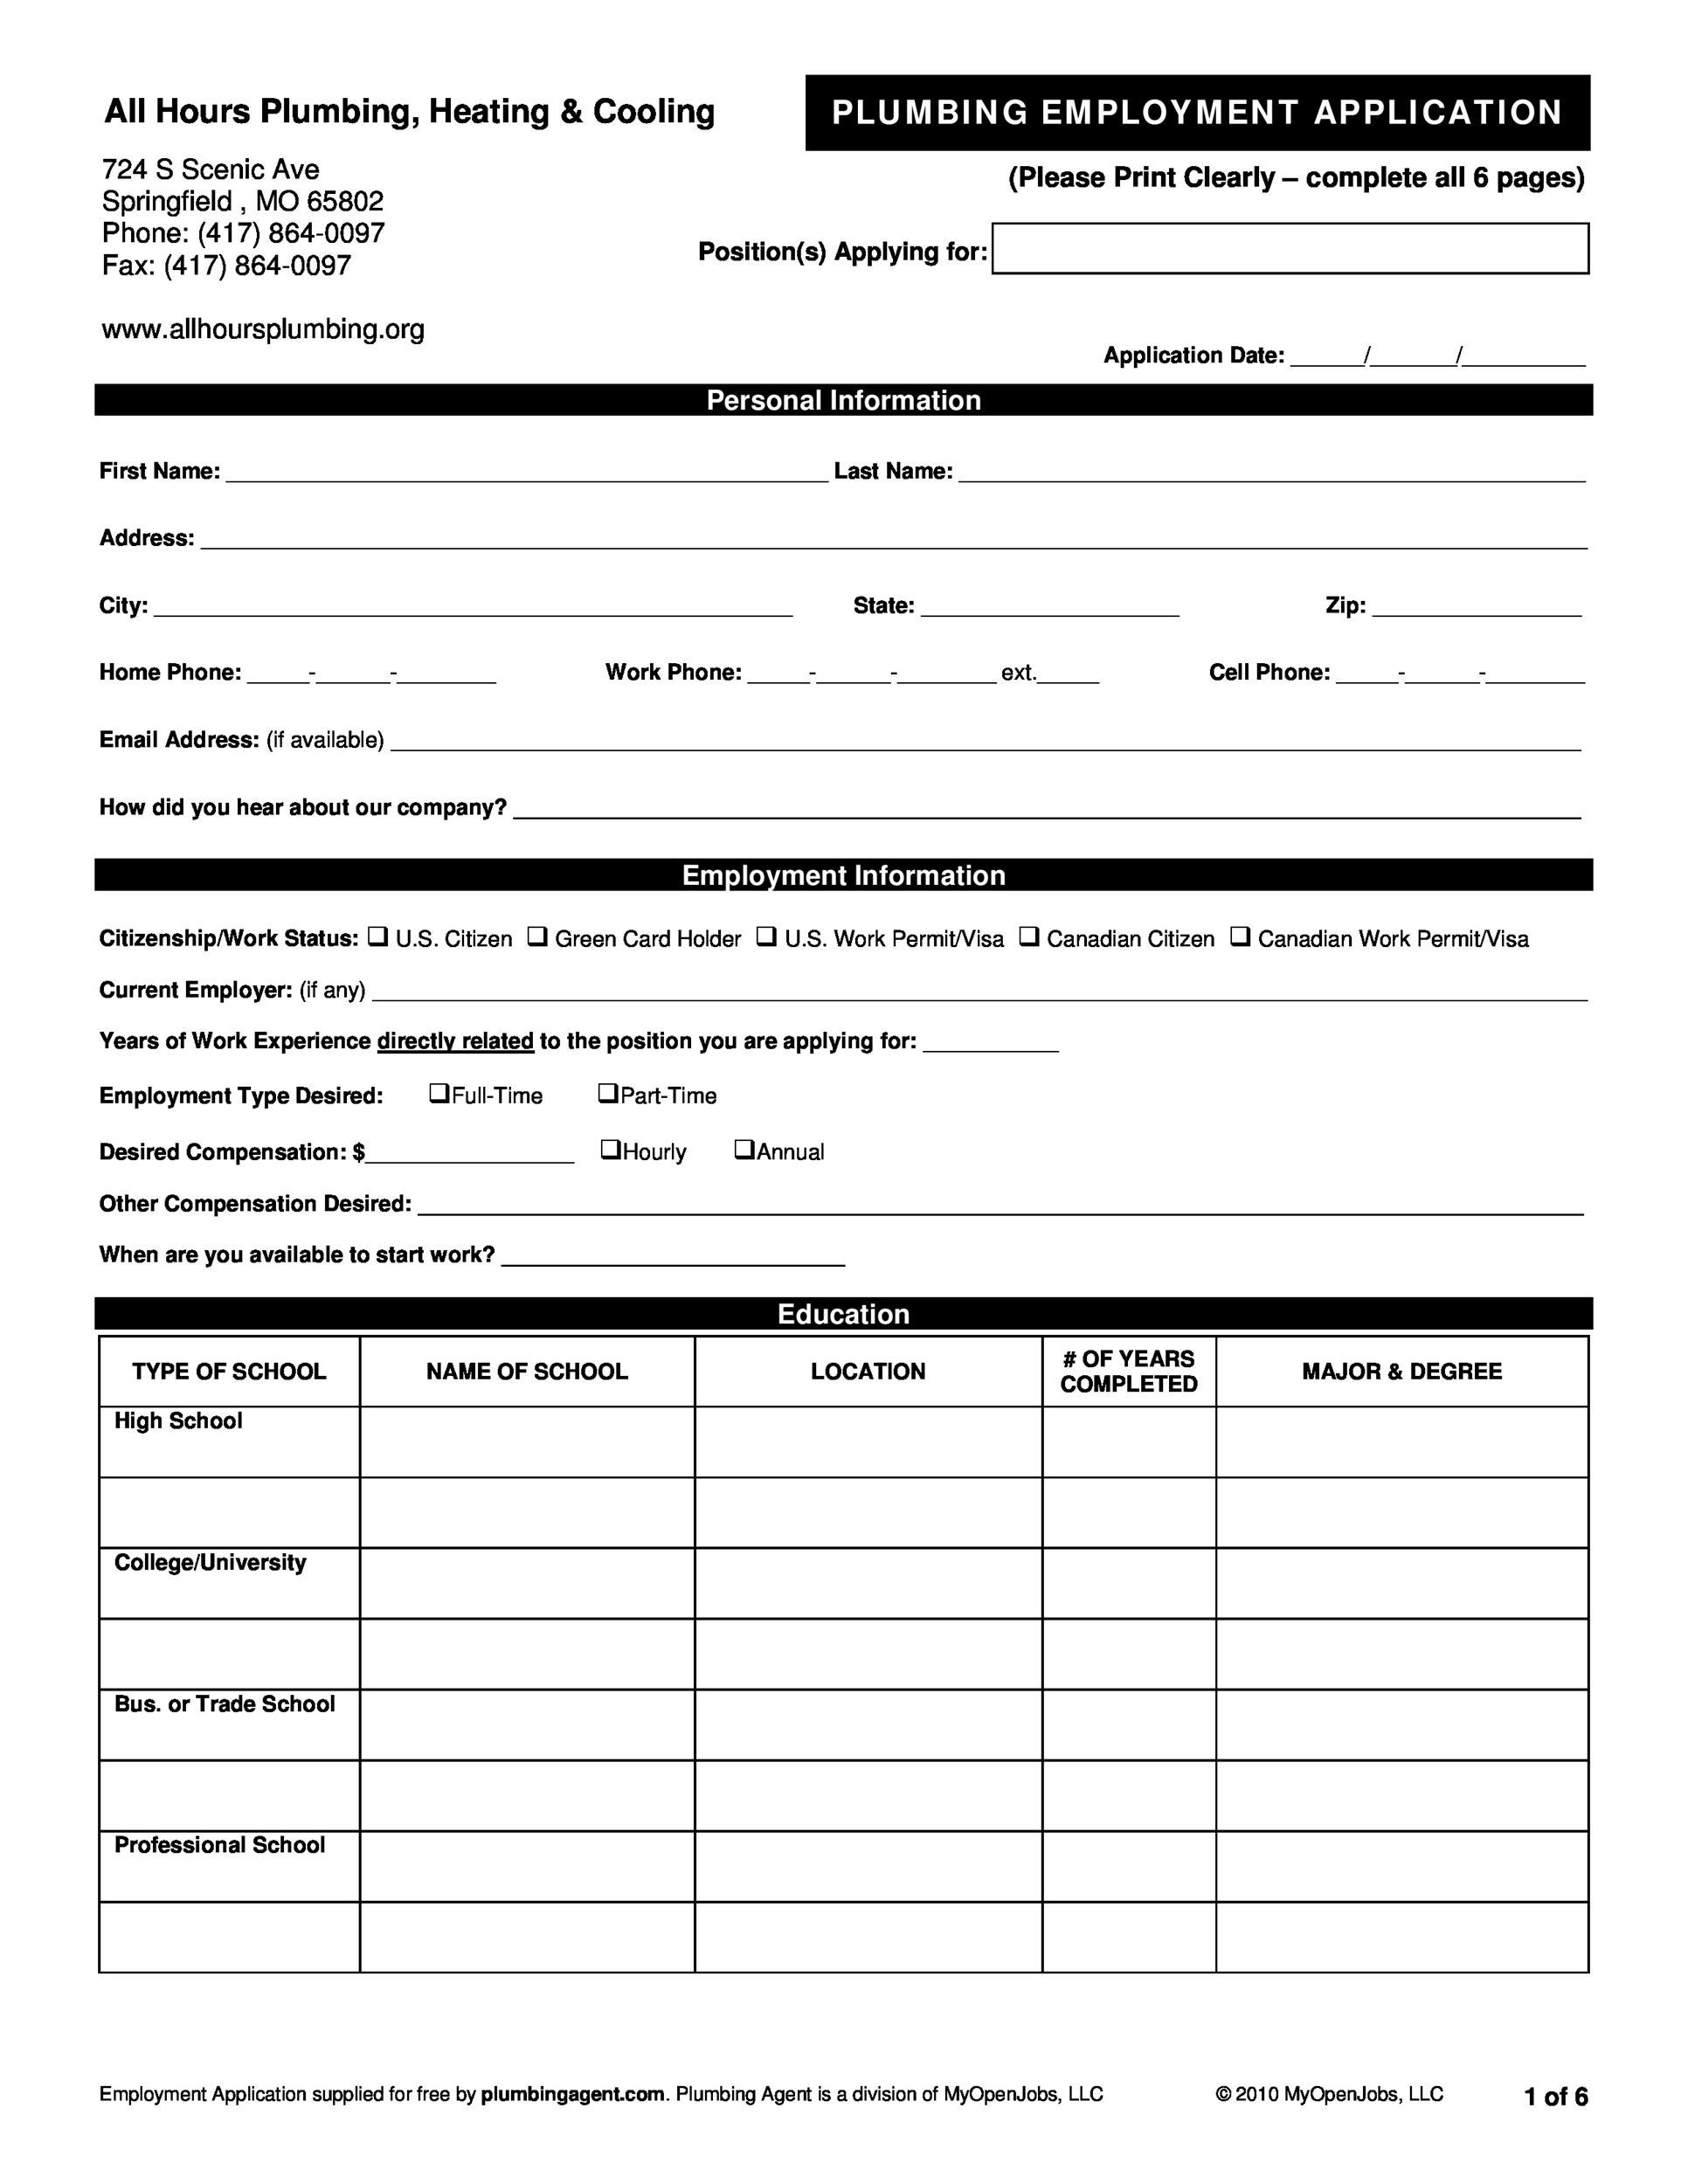 Free Employee Application Form Template from templatelab.com